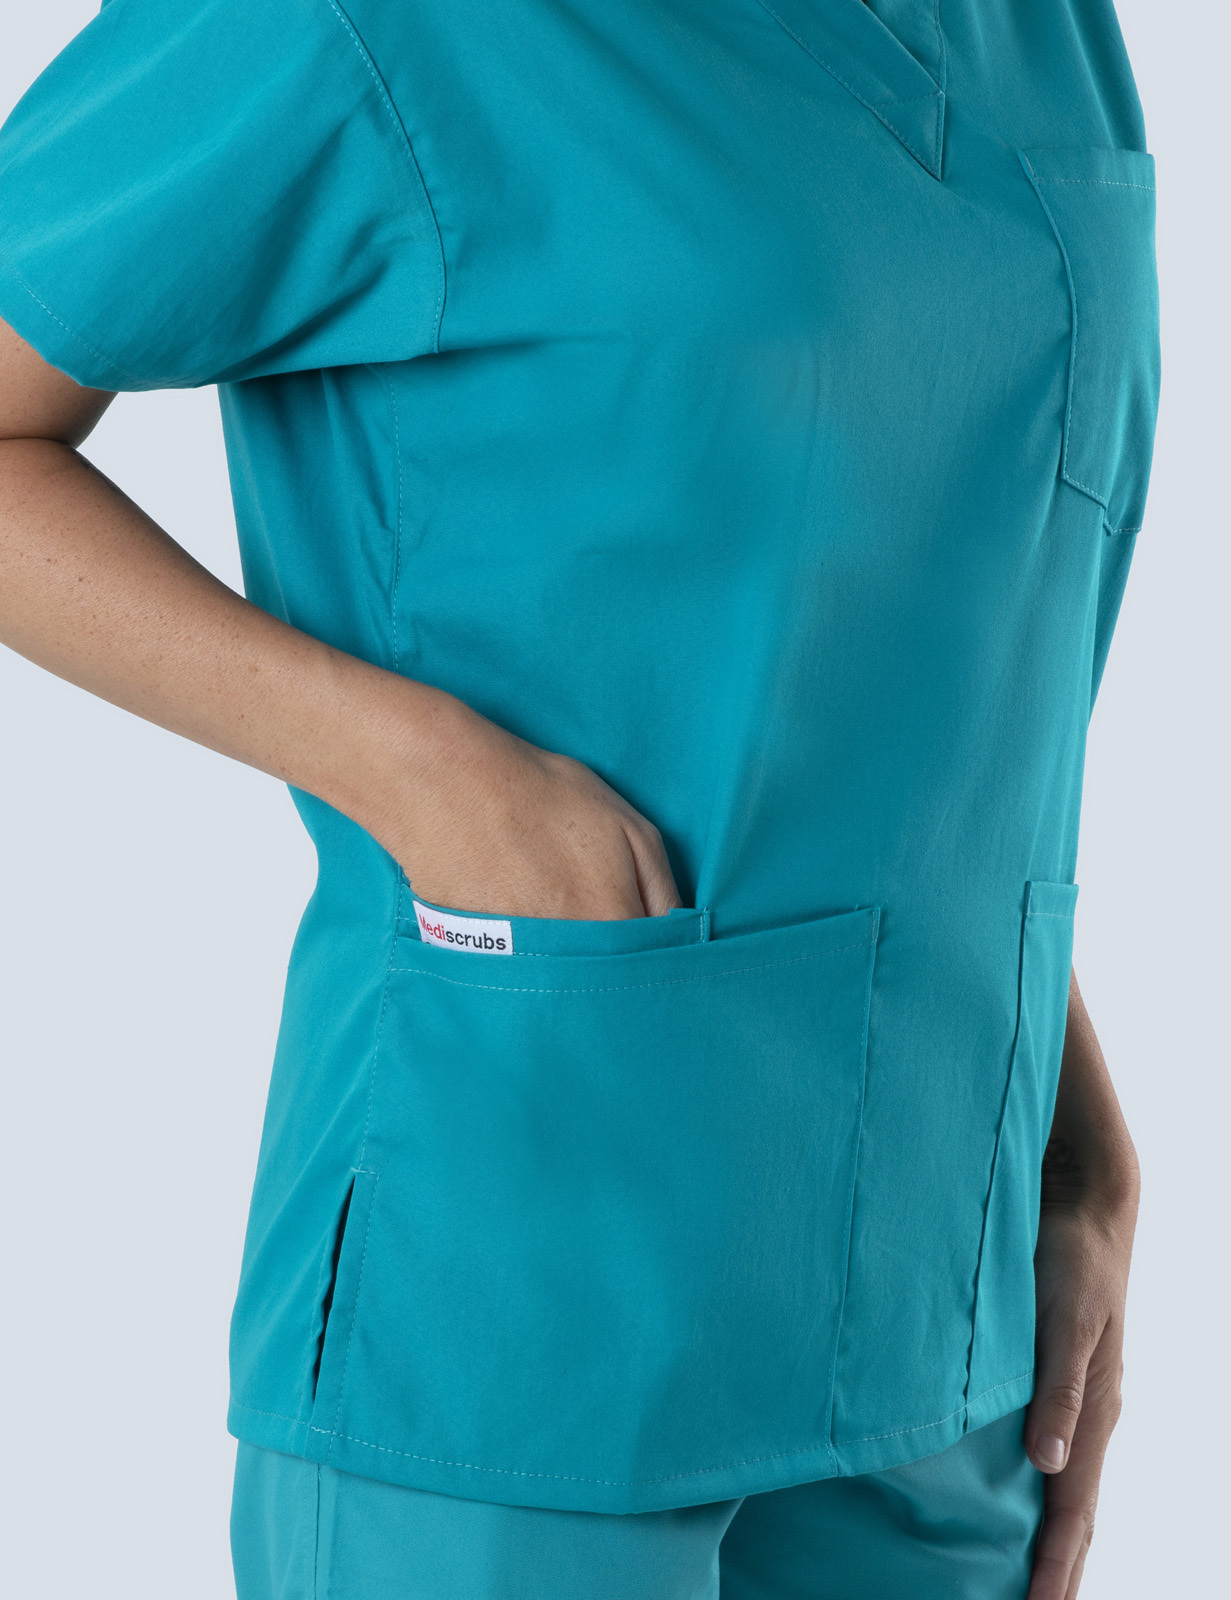 Gold Coast University Hospital - Cardiology (4 Pocket Scrub Top and Cargo Pants in Teal incl Logos)